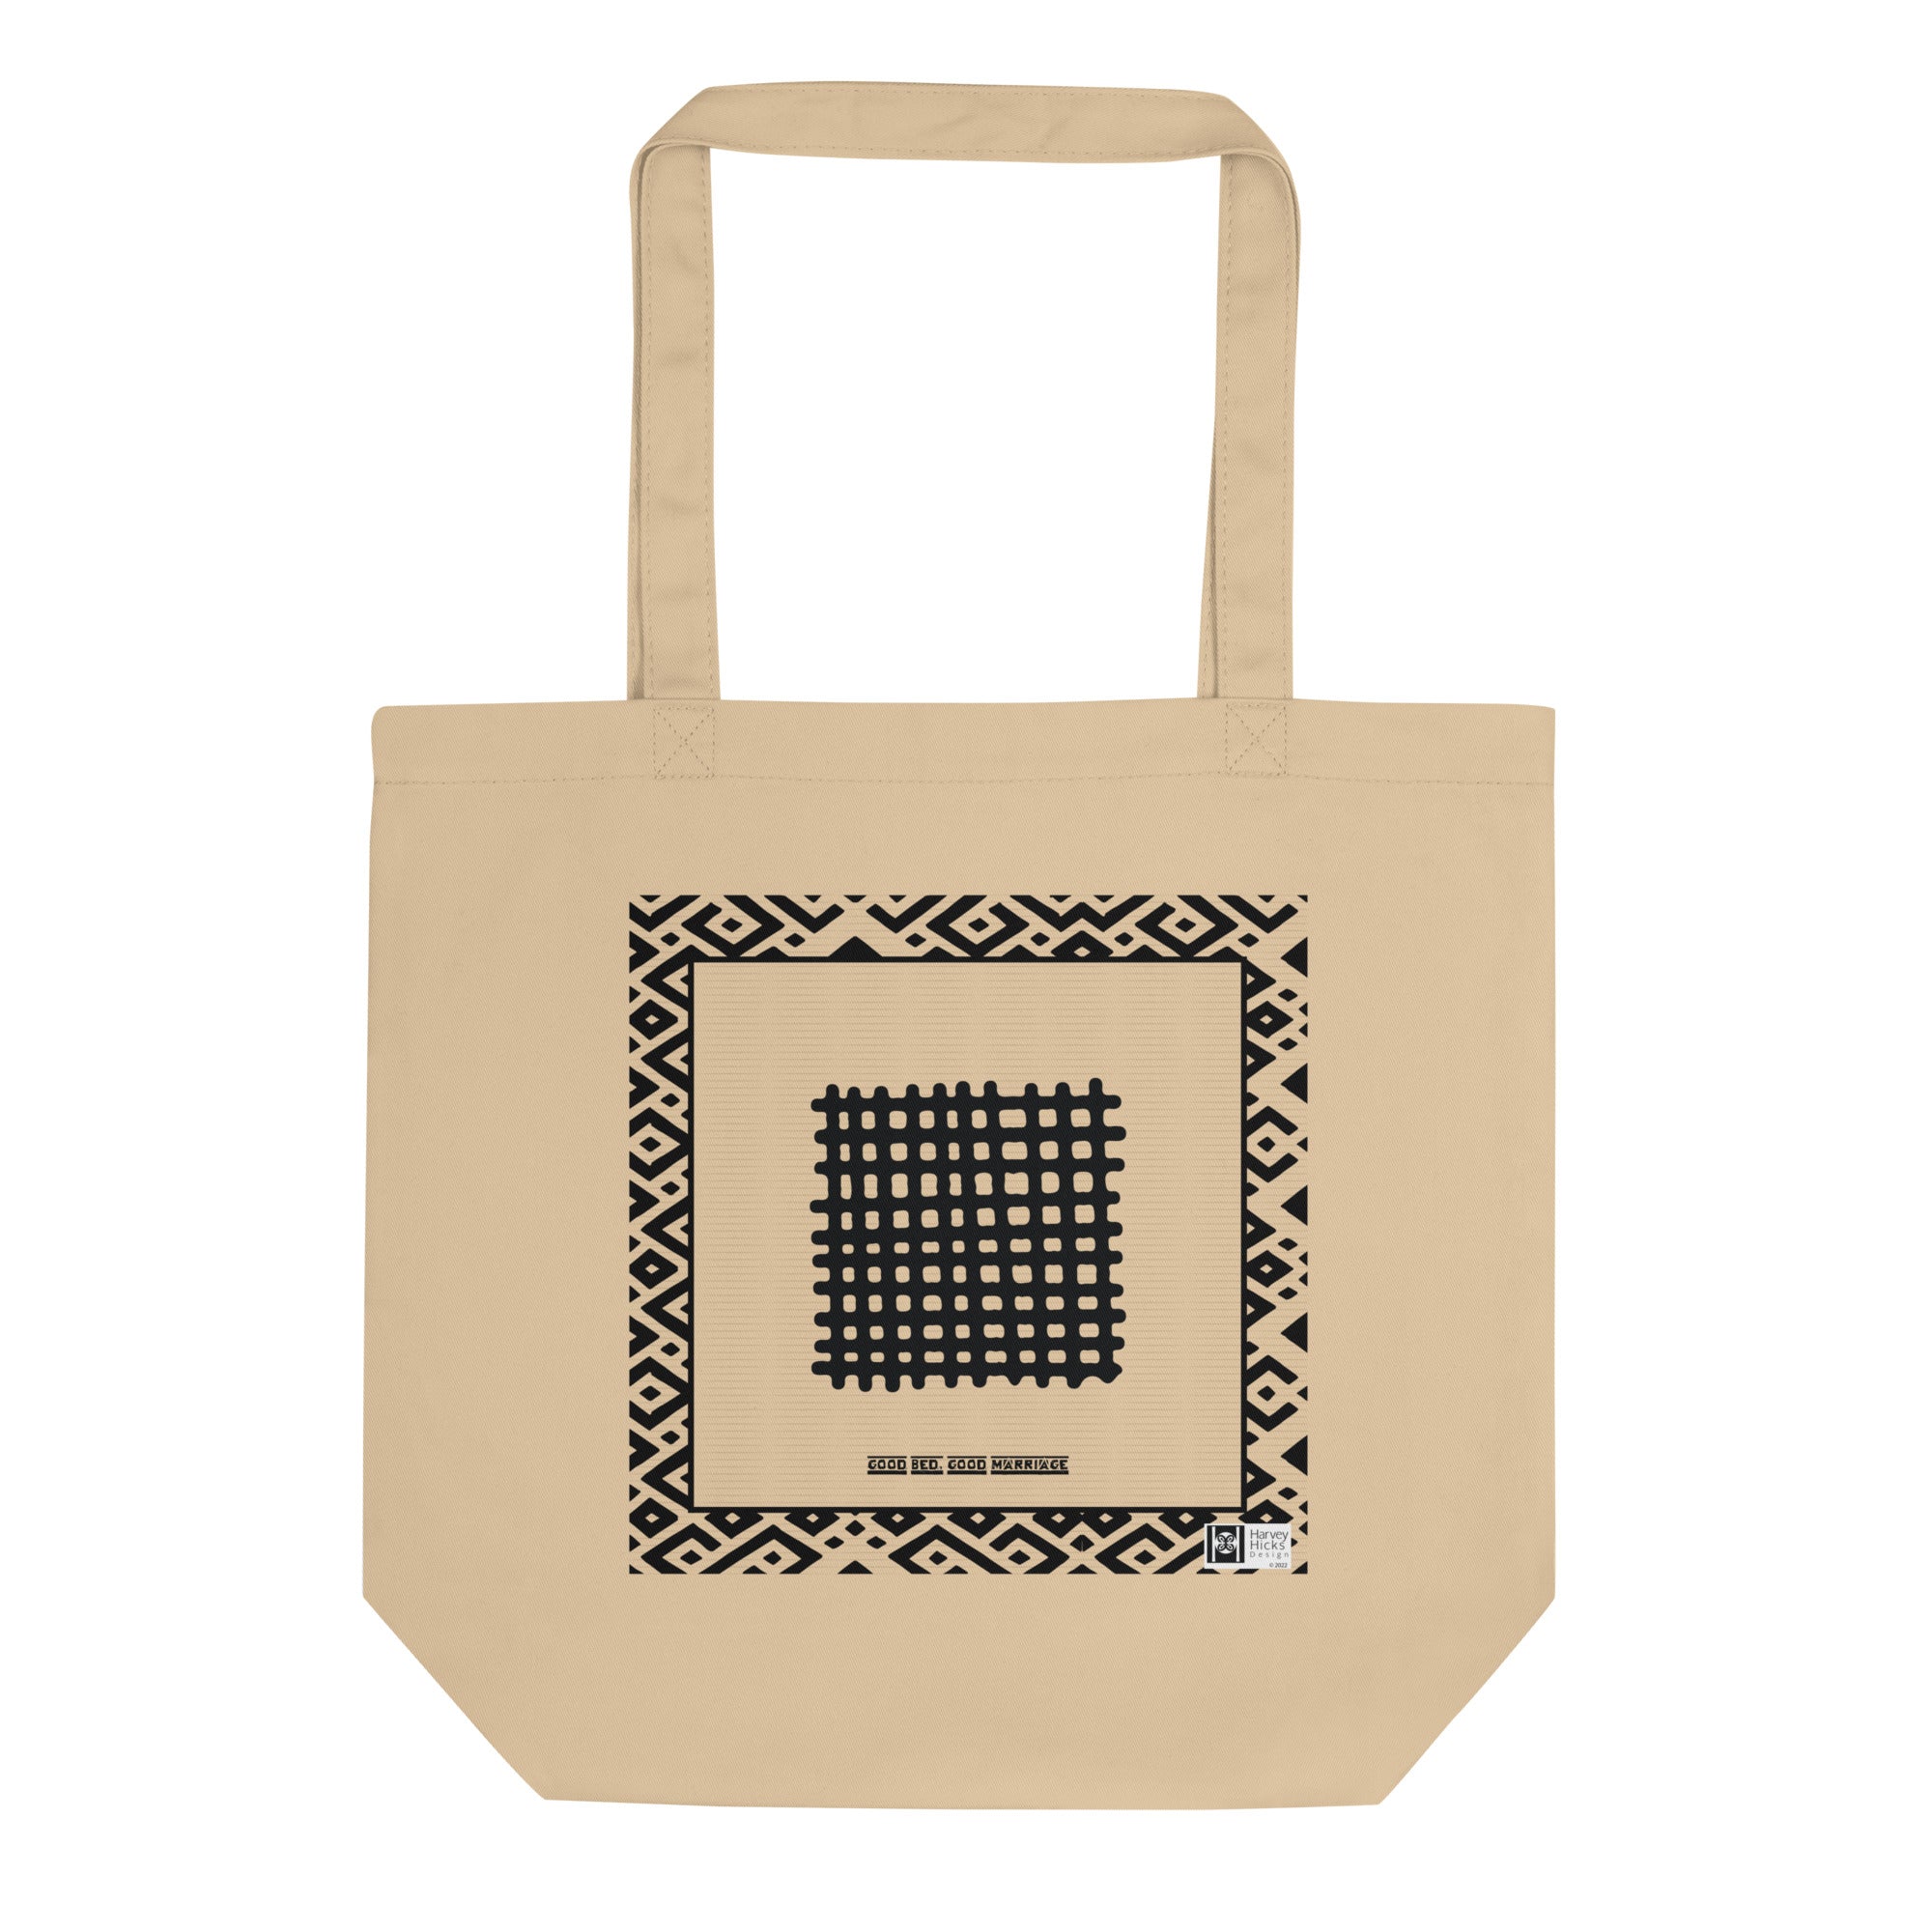 100% cotton Eco Tote Bag, featuring the Adinkra symbol for a good marriage